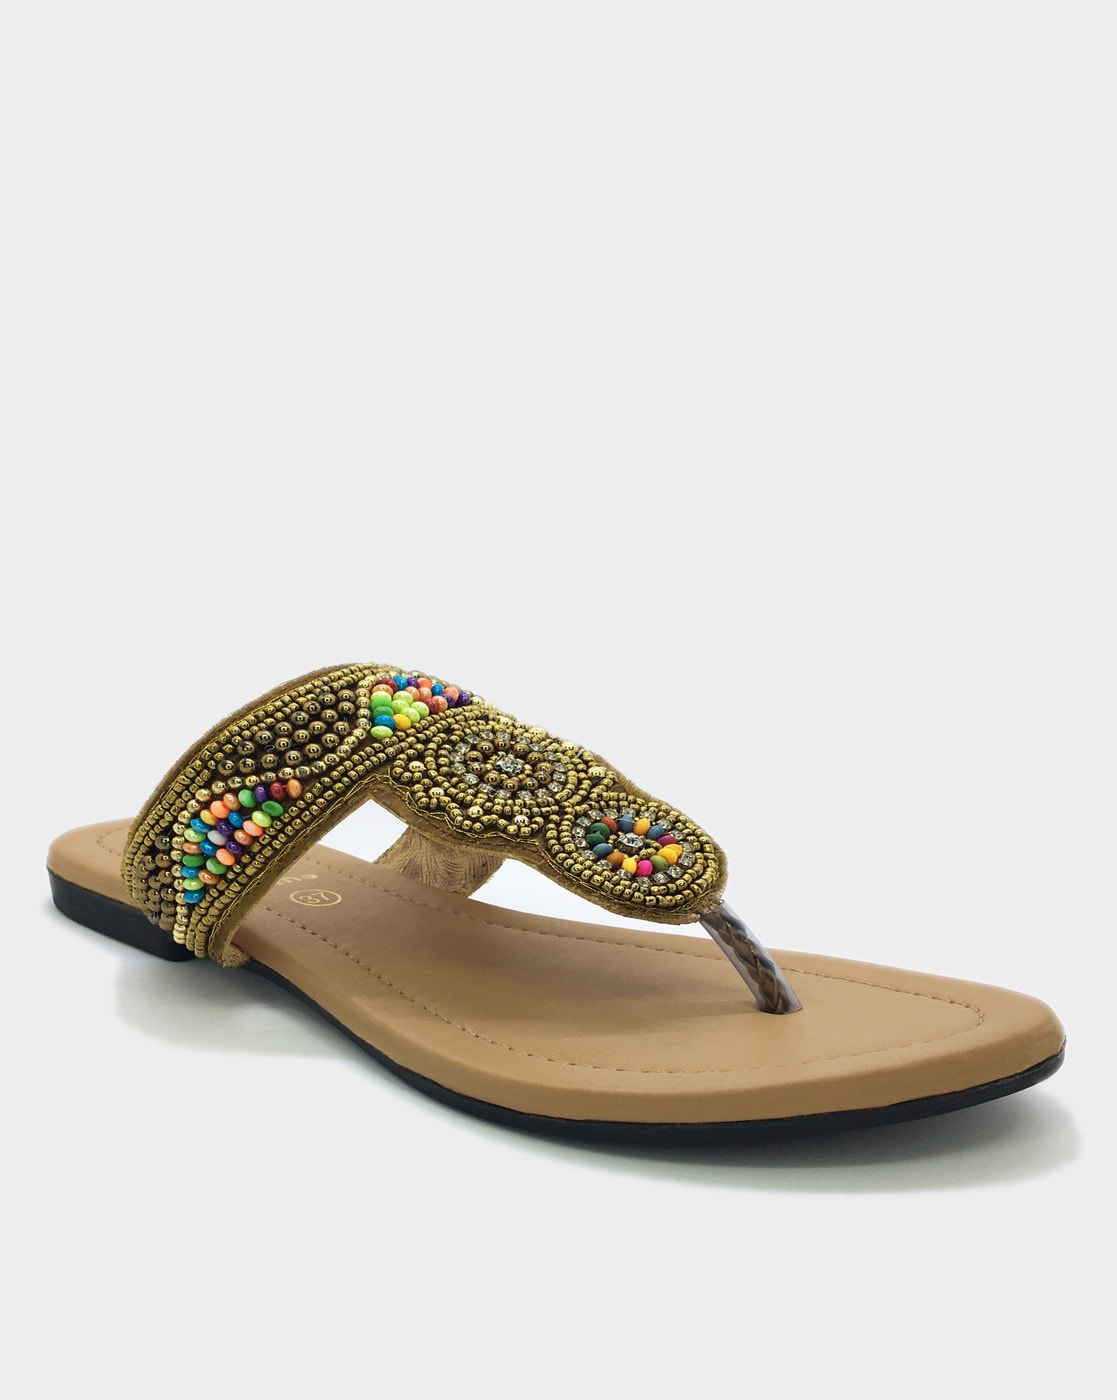 Stylish Flat Sandals Collection 2020 | Trendy Working Flat Sandals | Latest  Beautiful Flat Sandals | Flip flop shoes, Sandals, Casual slippers